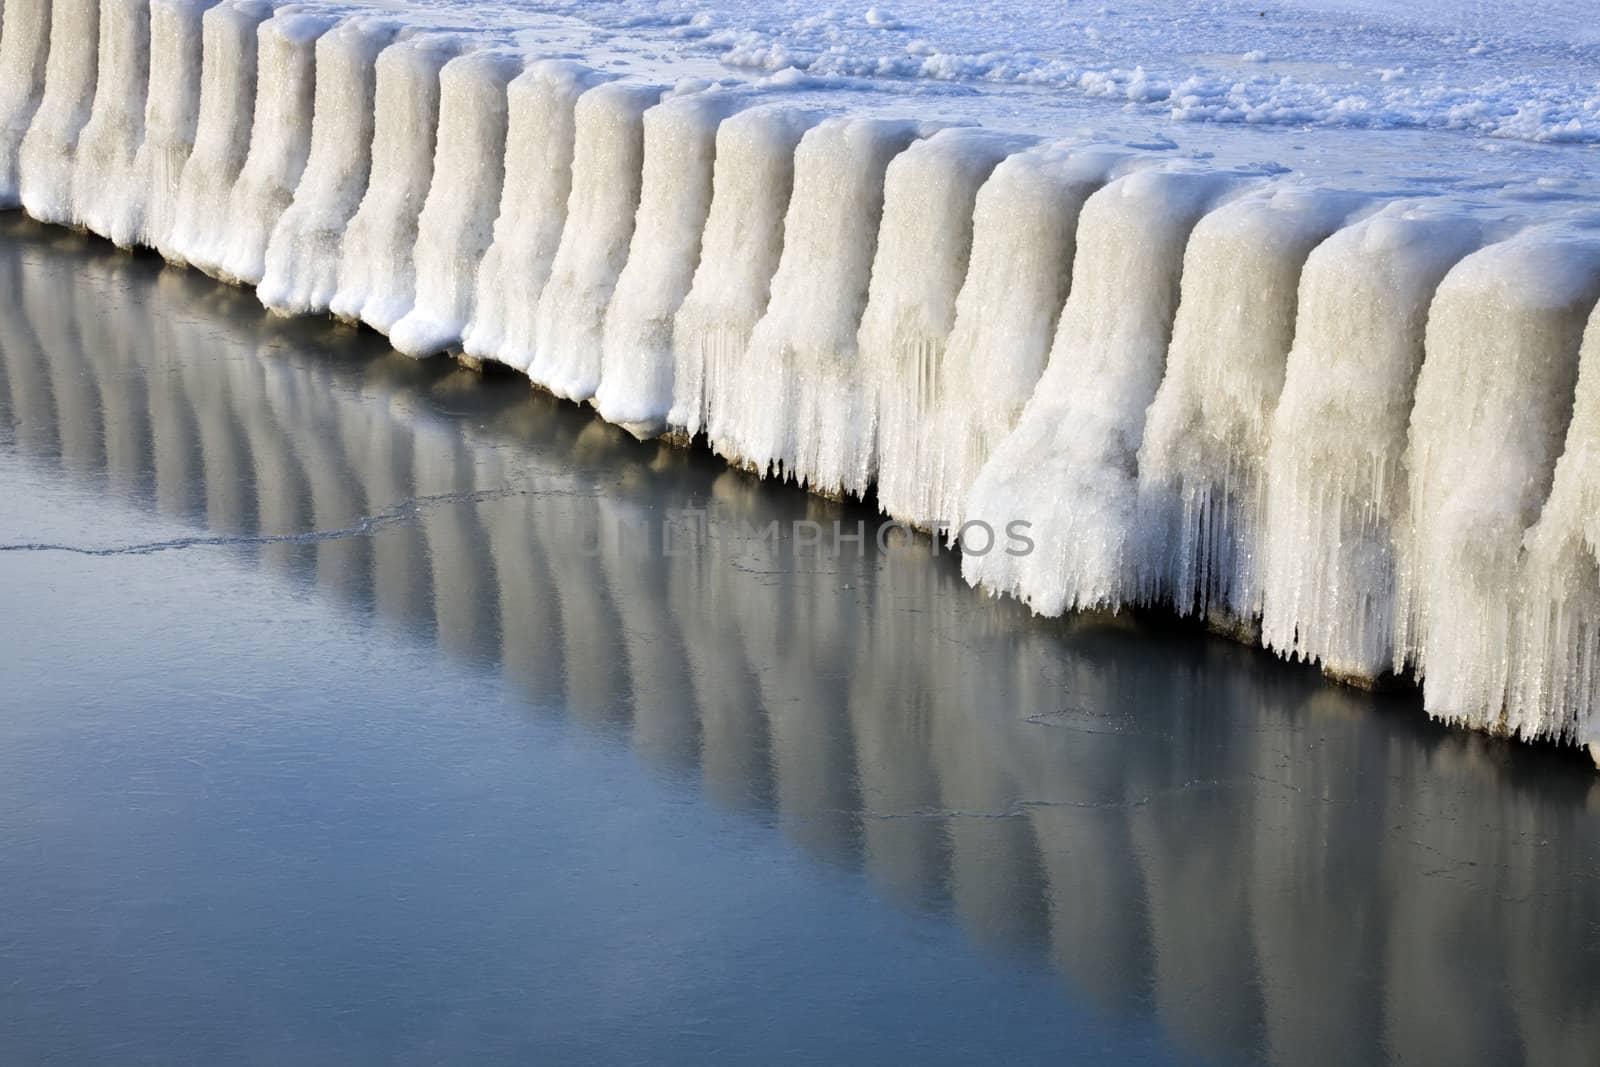 Icy shore of Lake Michigan - seen in Chicago.